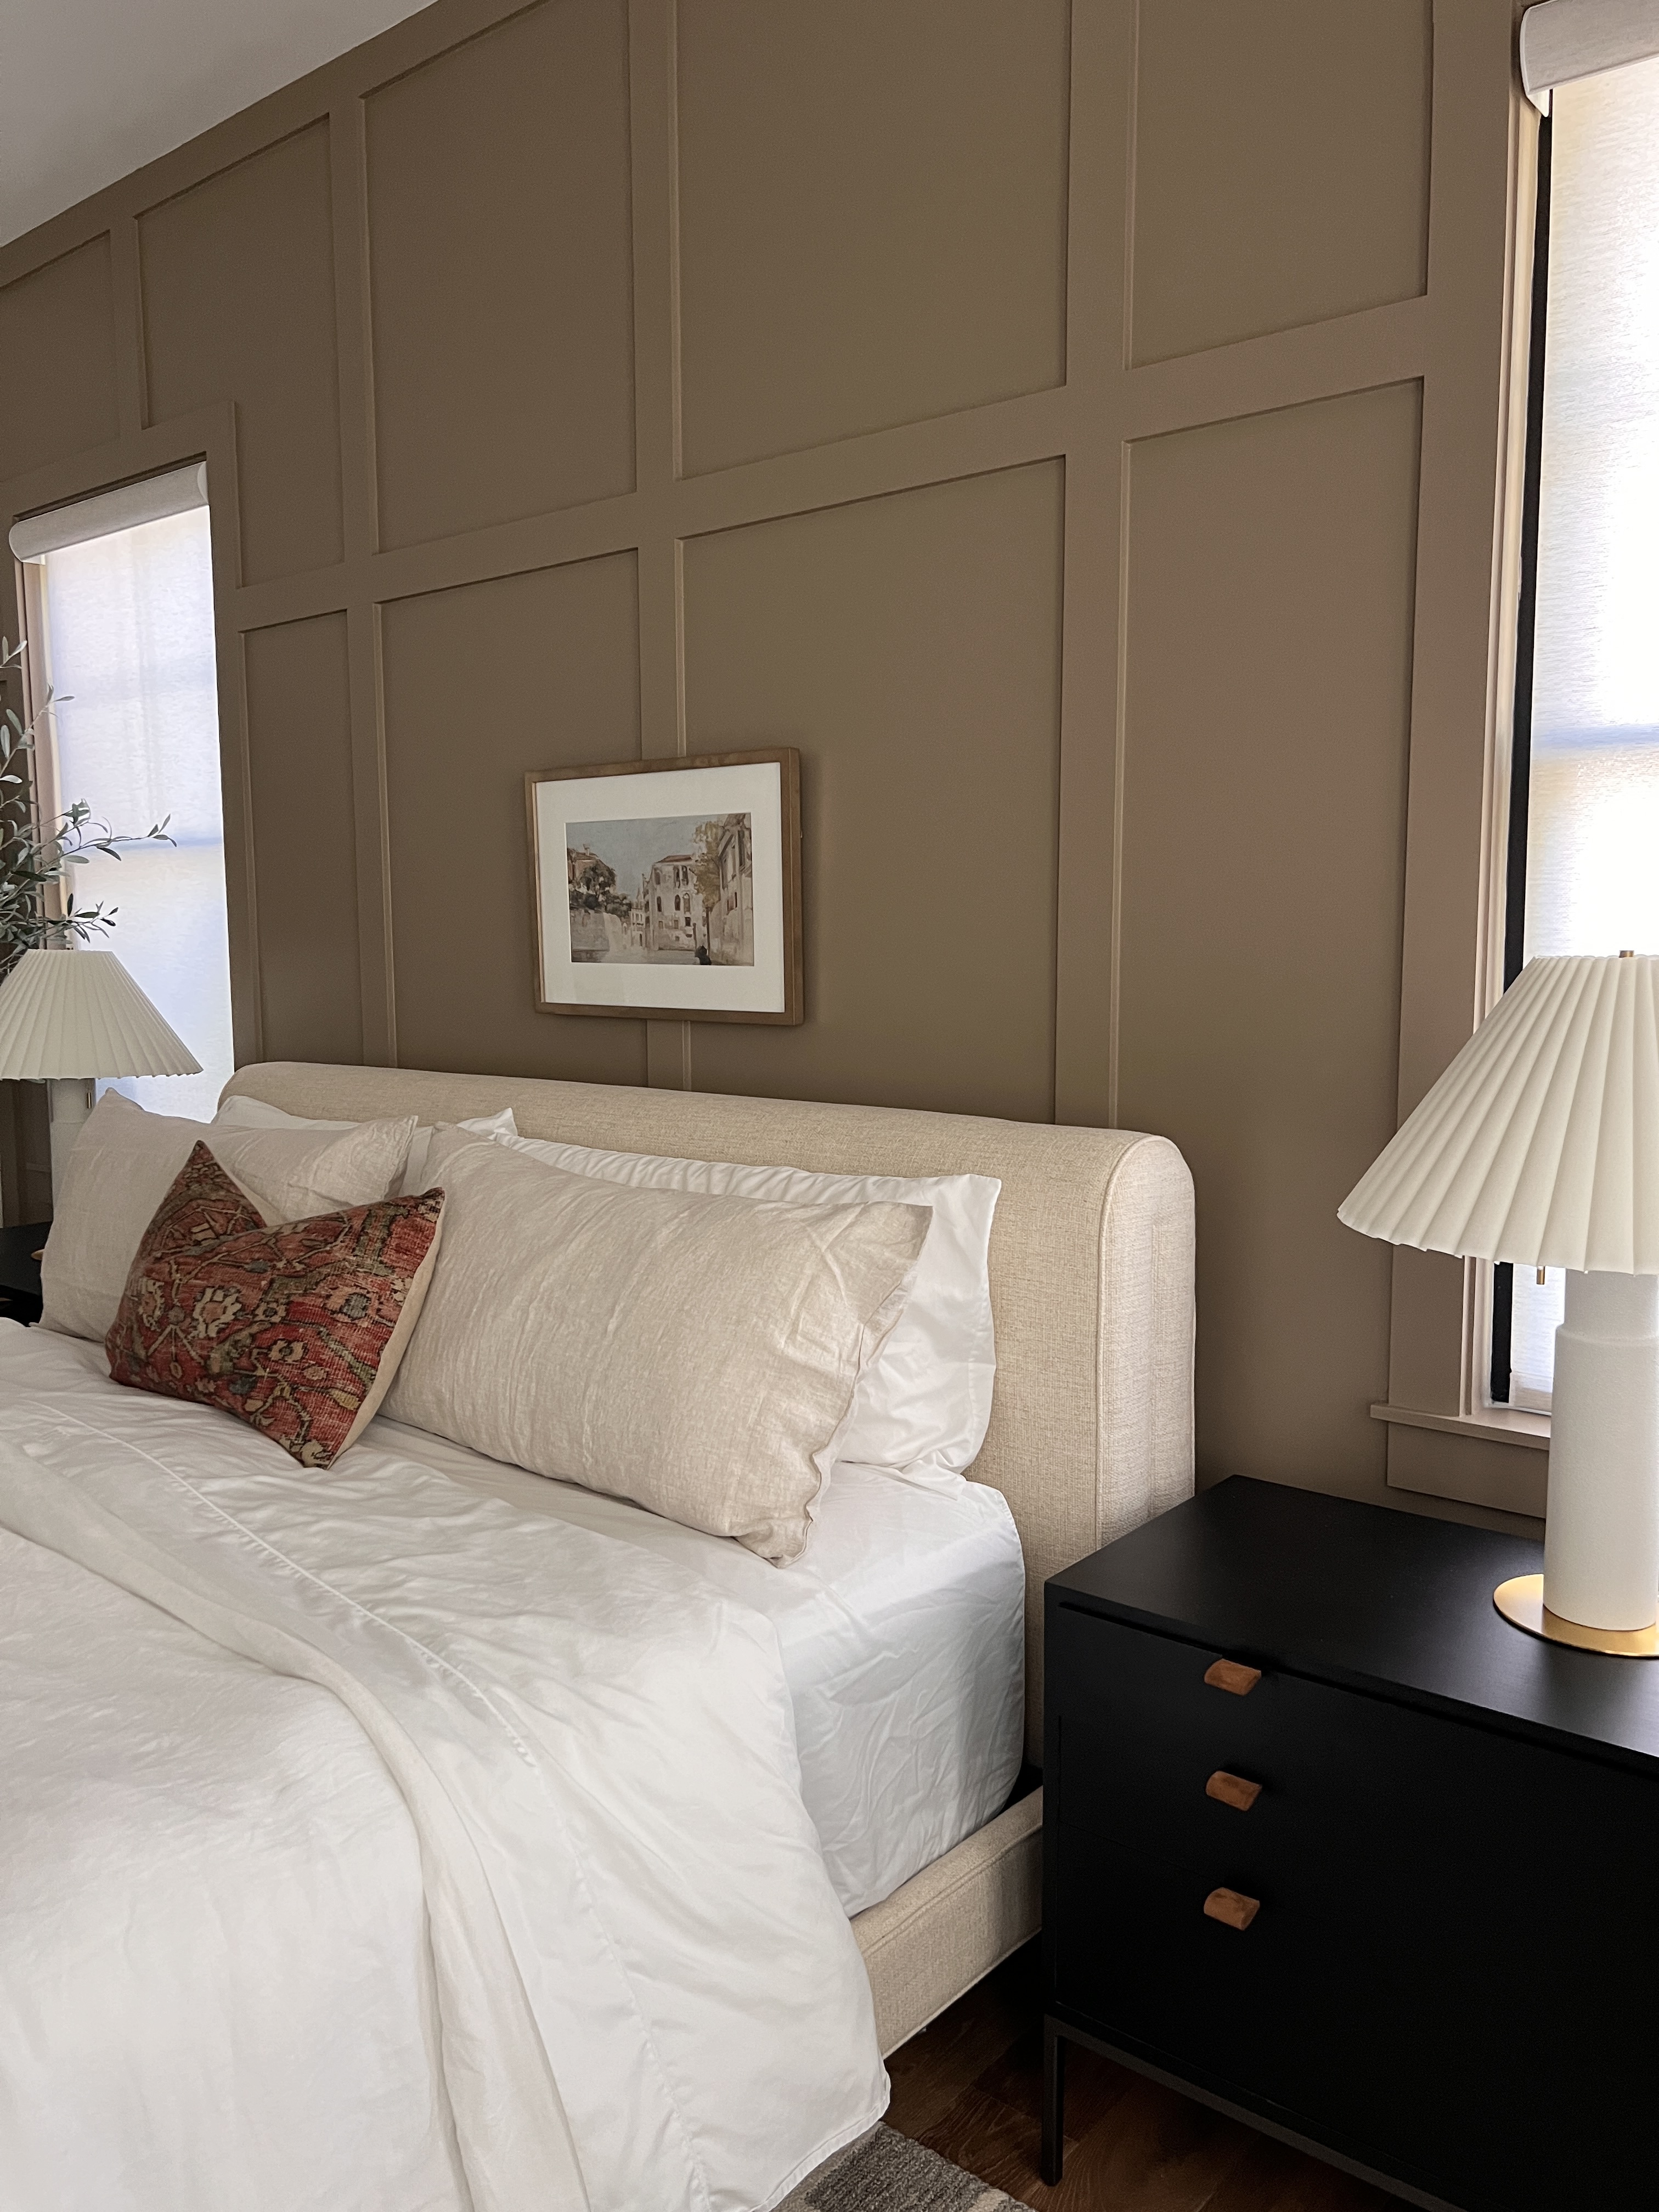  This master bedroom accent wall adds character and visual appeal to this wall. 